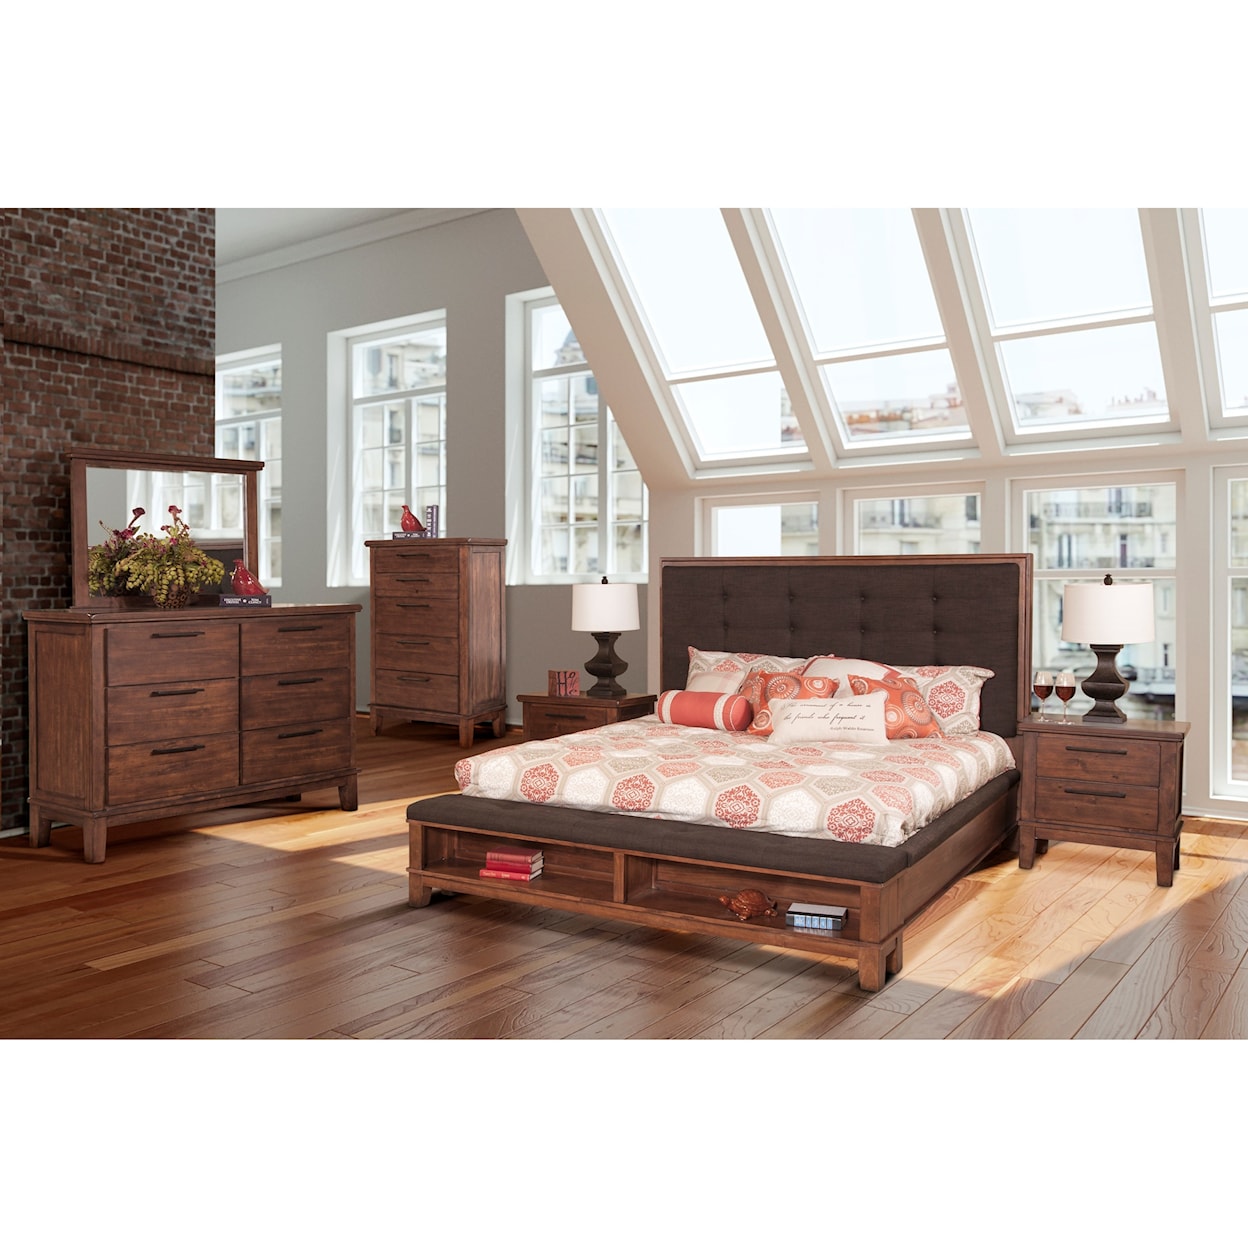 New Classic Cagney Queen Bedroom Group